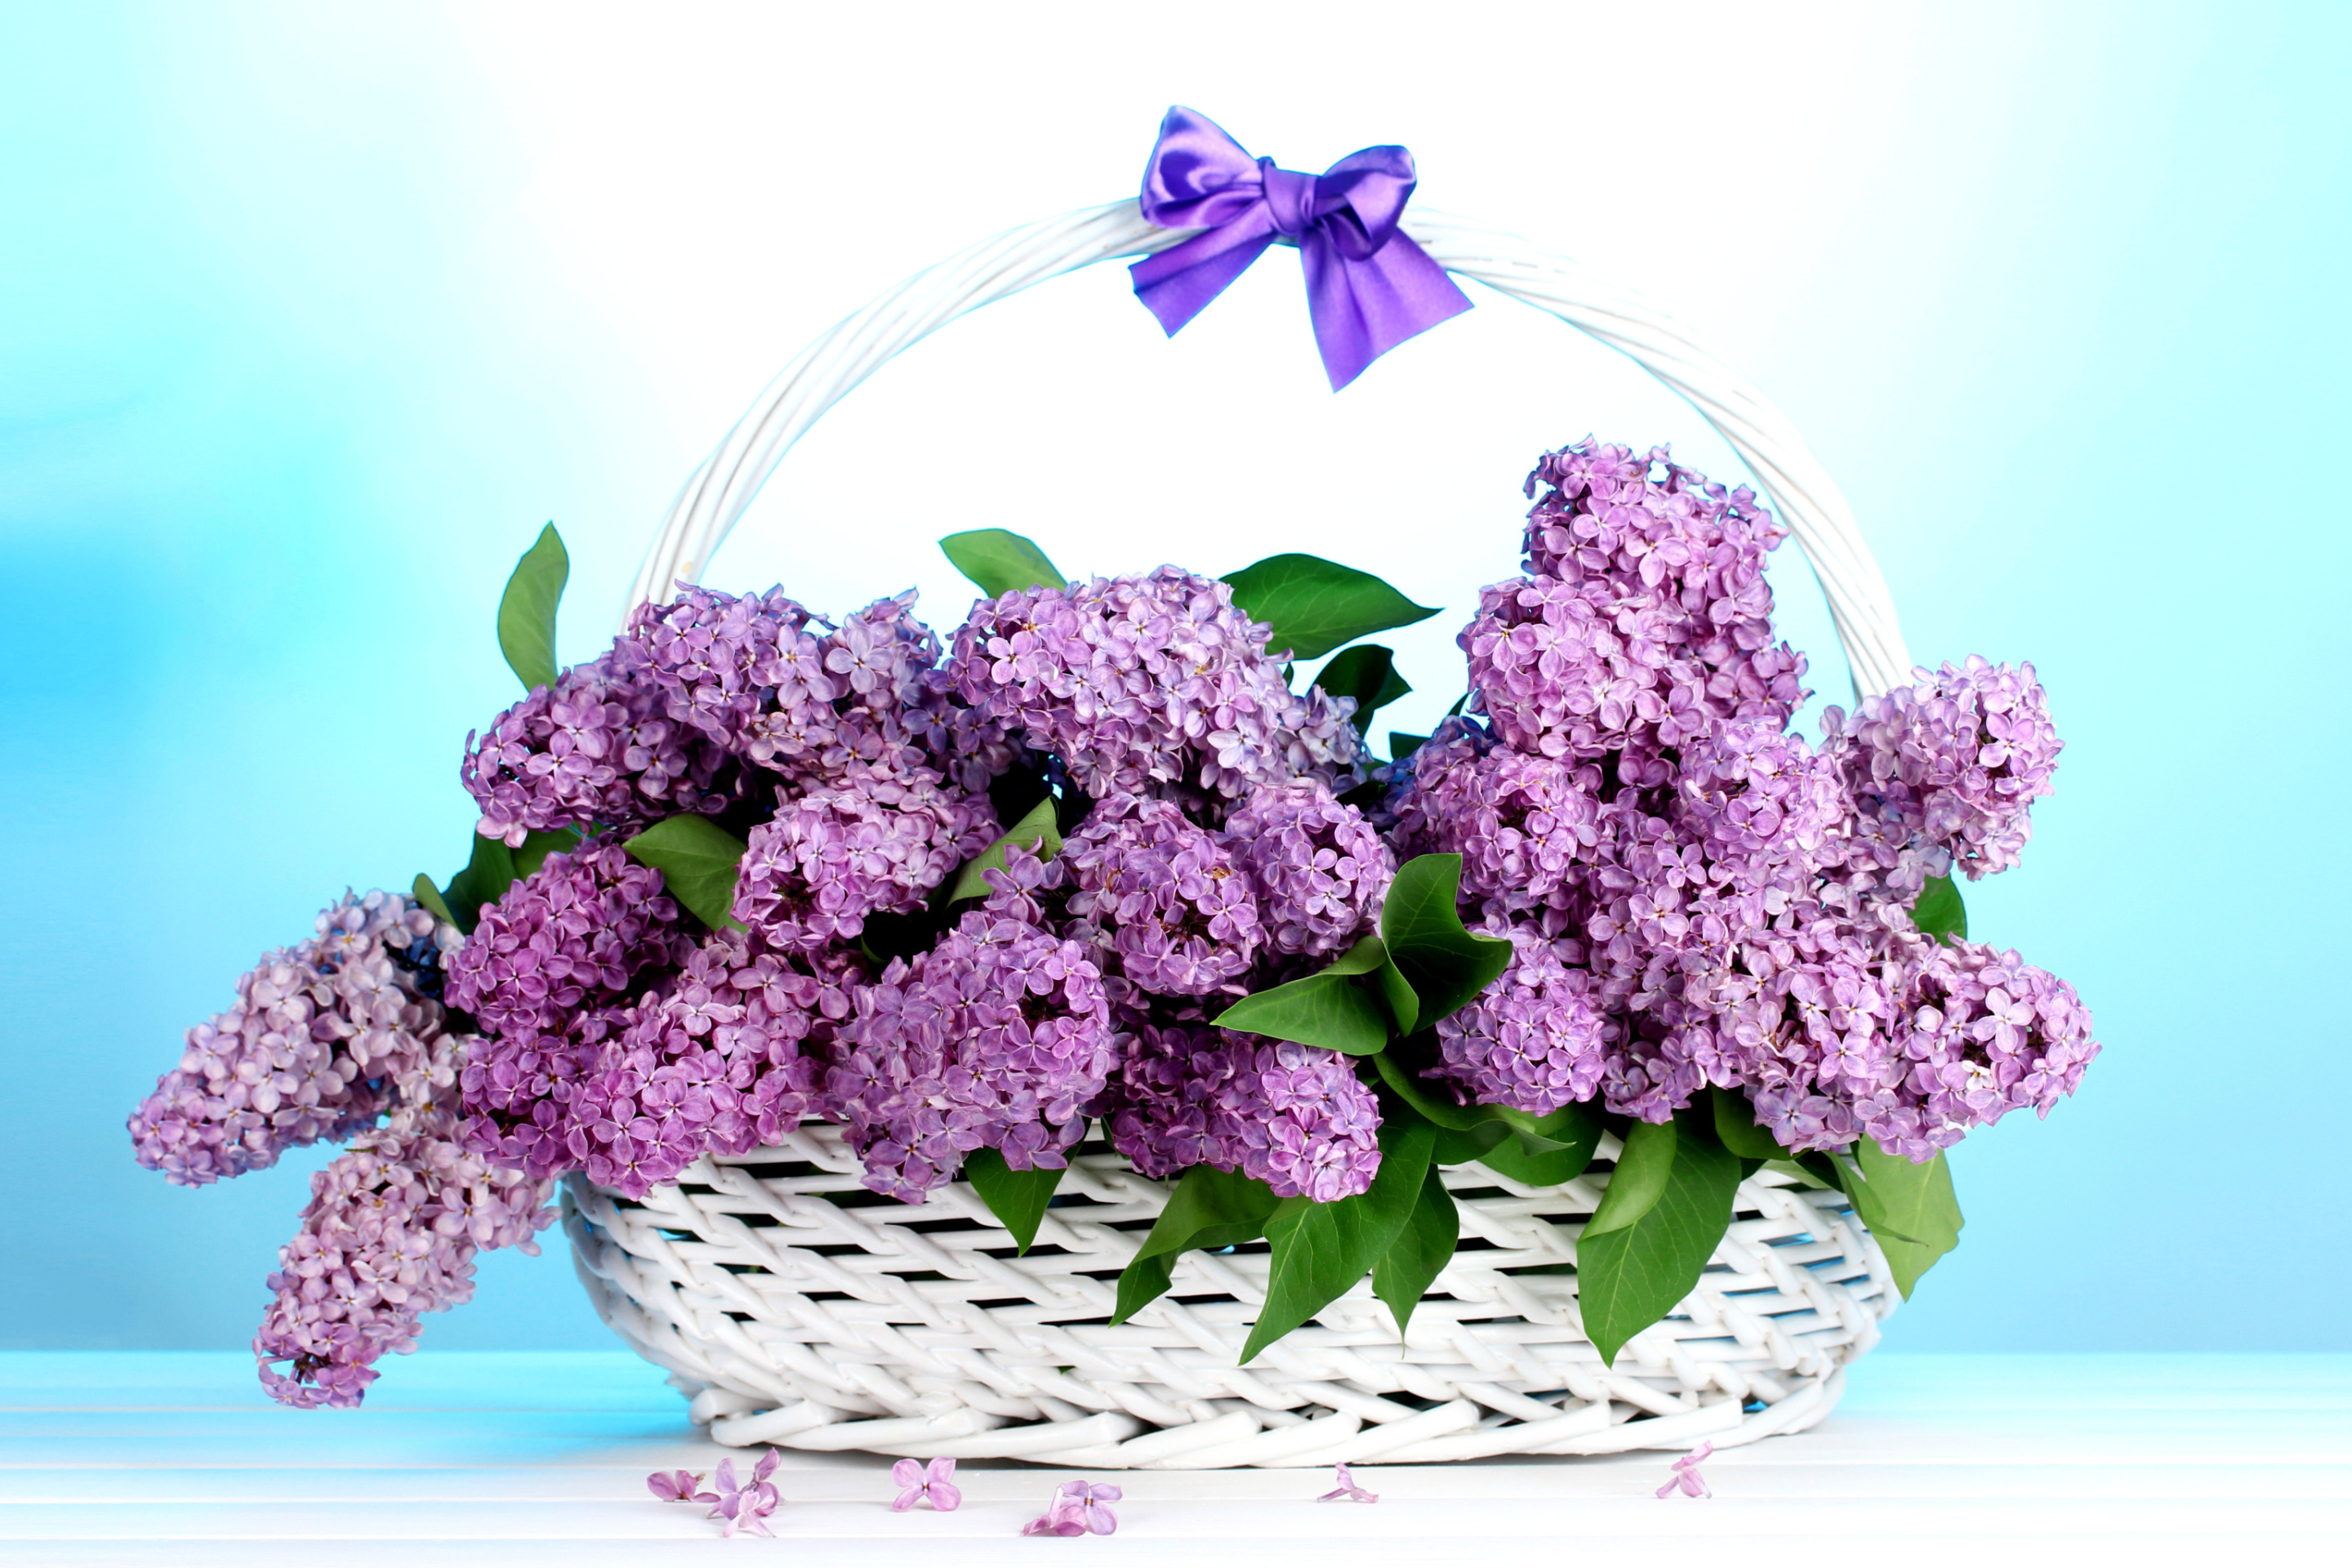 Baskets with lilac flowers screenshot #1 2880x1920